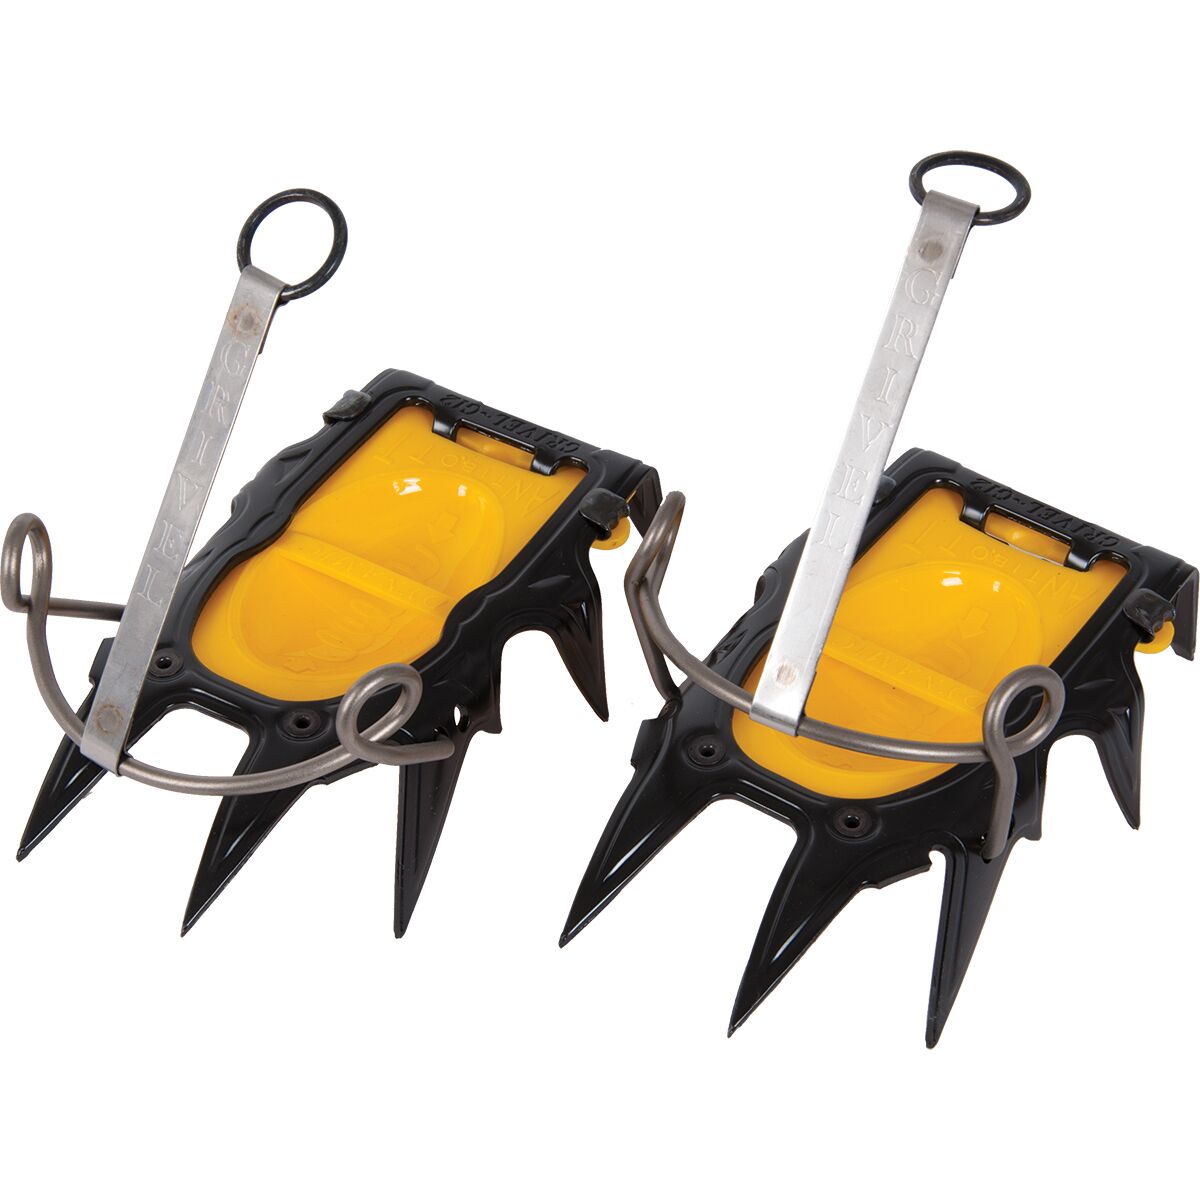 Grivel G12 Crampon Spare Parts - Front